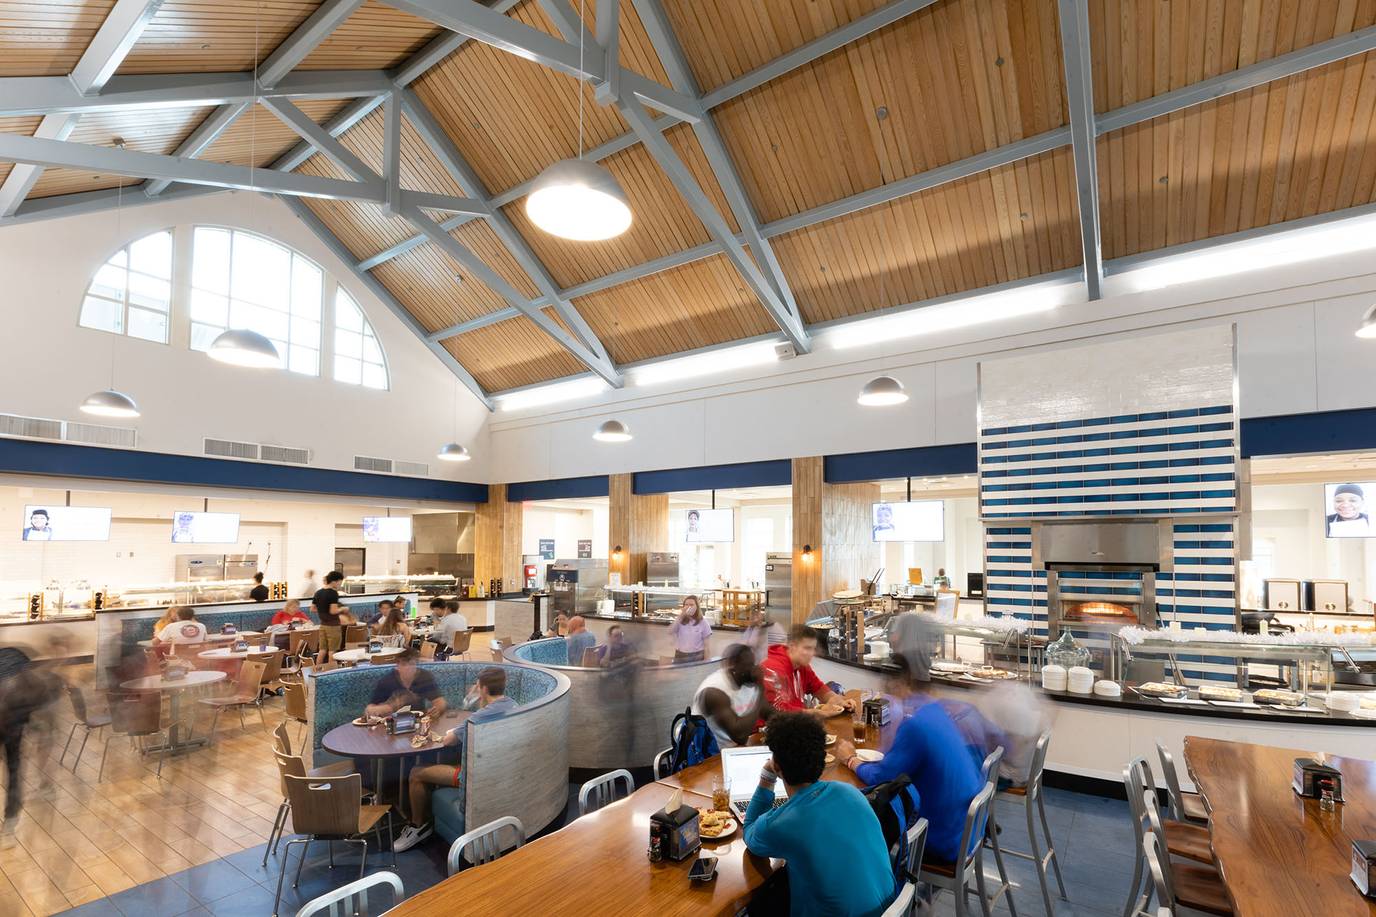 A rendering of the newly renovated Skillman Dining Hall.